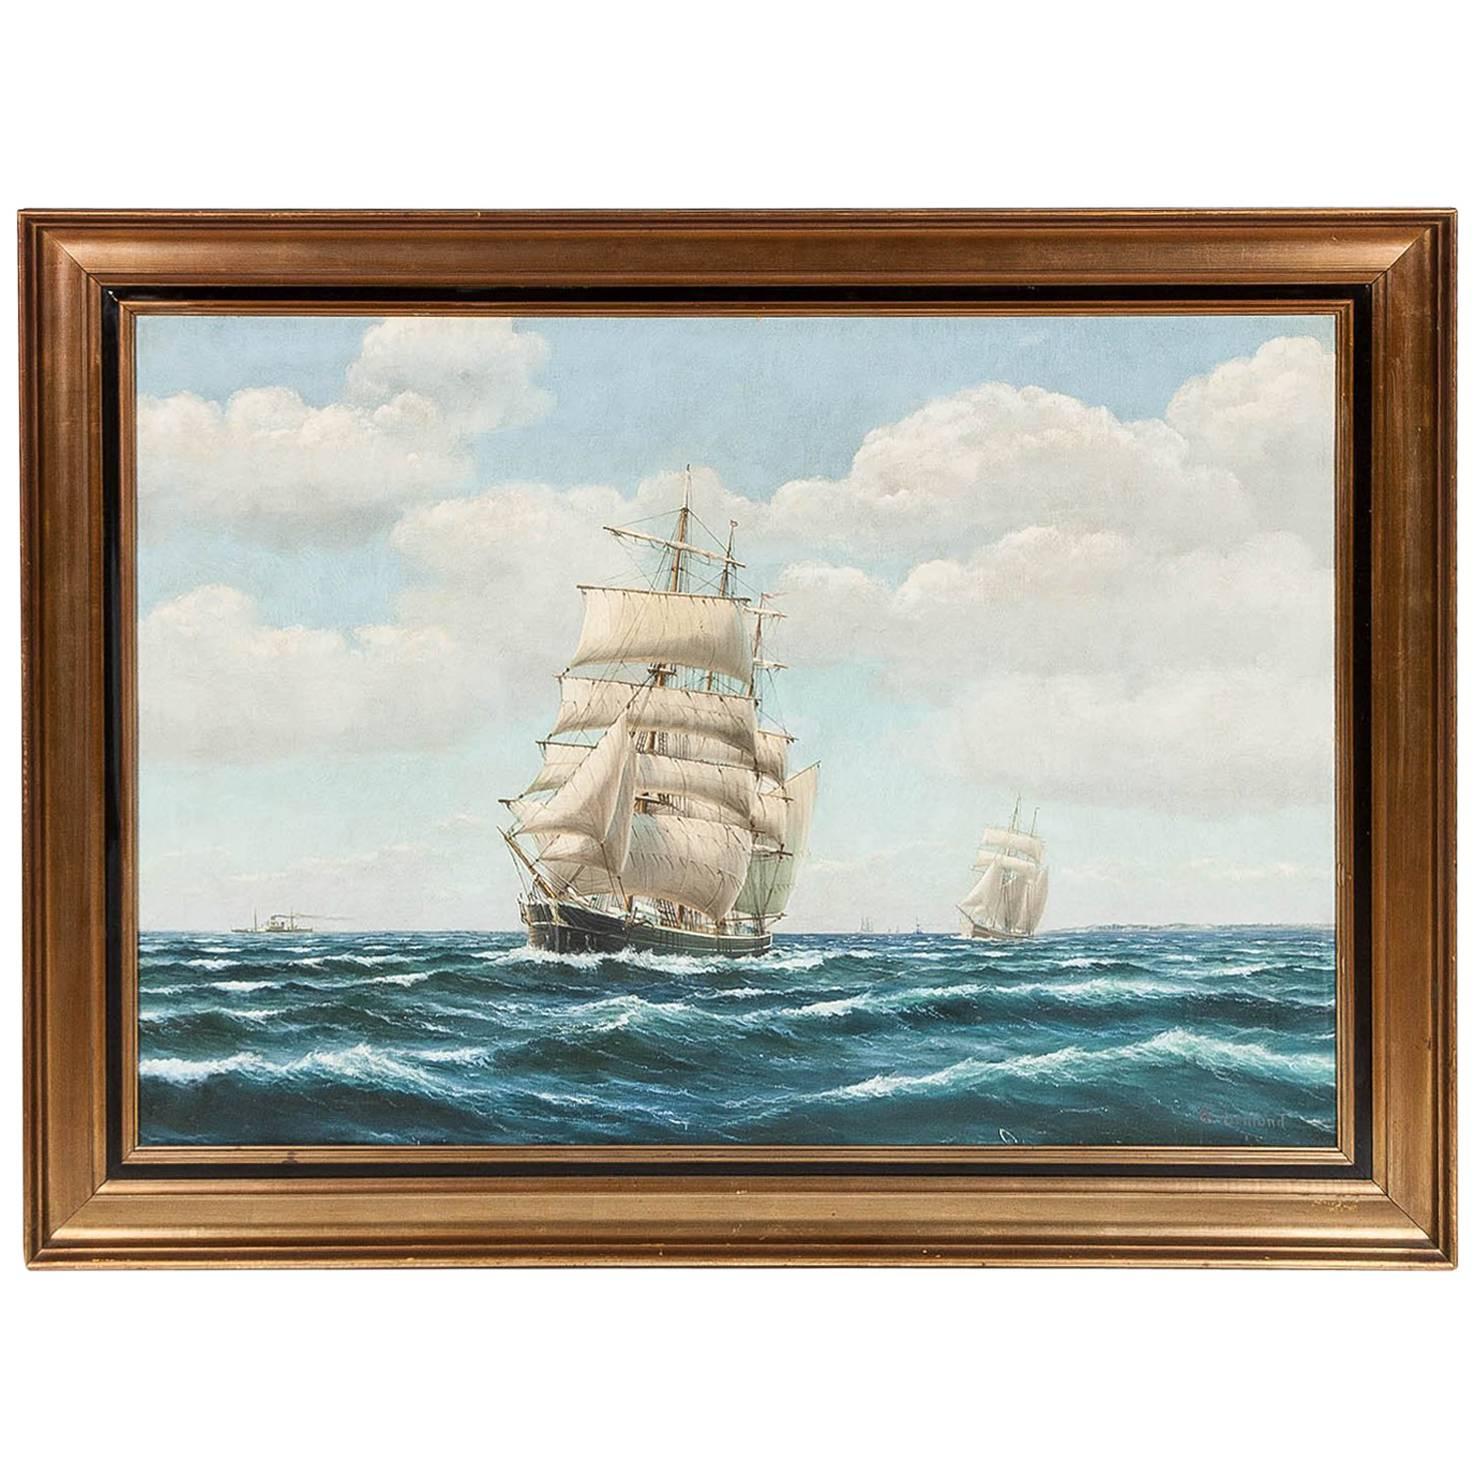 Baltic Traders oil painting by Frederik Ernlund